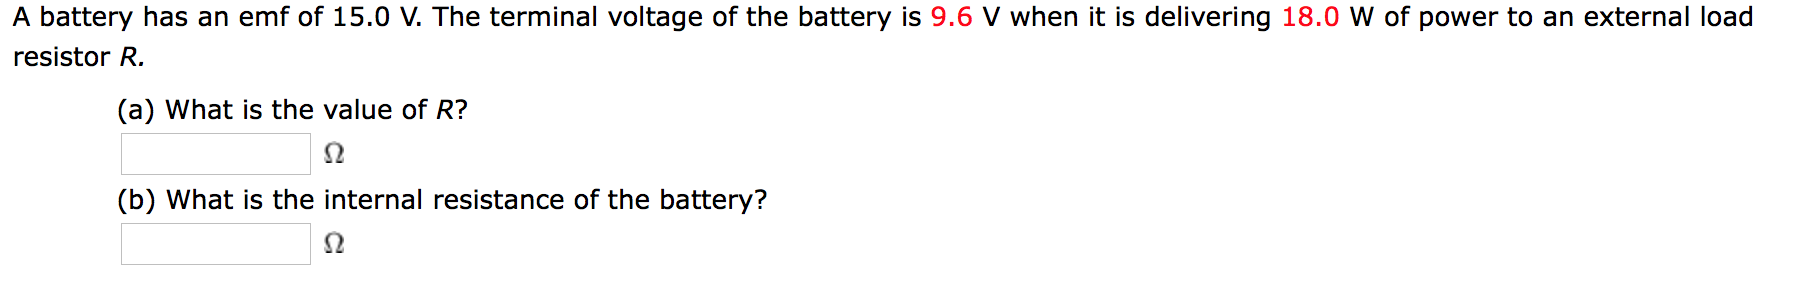 A battery has an emf of 15.0 V. The terminal voltage of the battery is 9.6 V when it is delivering 18.0 W of power to an external load
resistor R.
(a) What is the value of R?
(b) What is the internal resistance of the battery?
